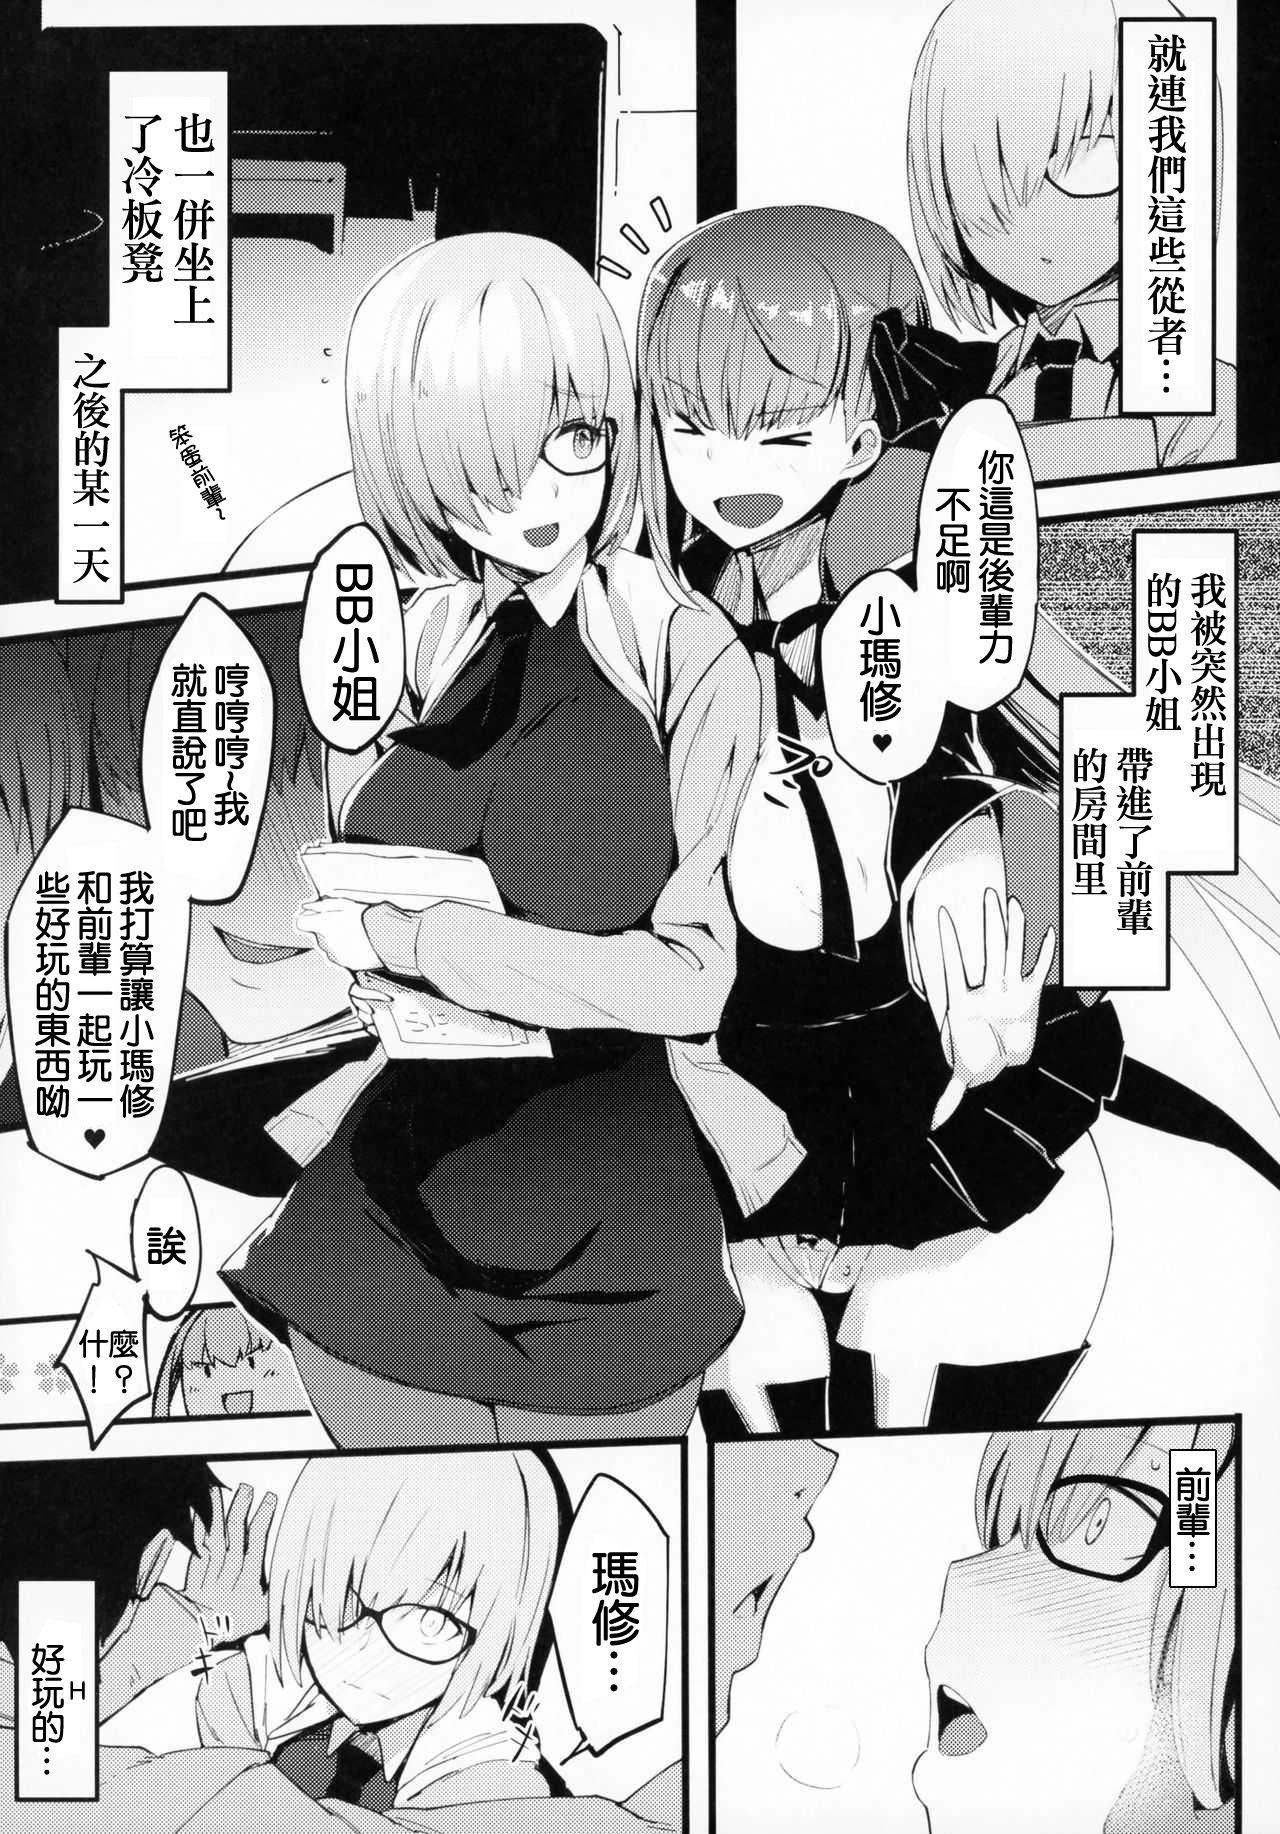 Scandal Kouhai Channel - Fate grand order Yoga - Page 5